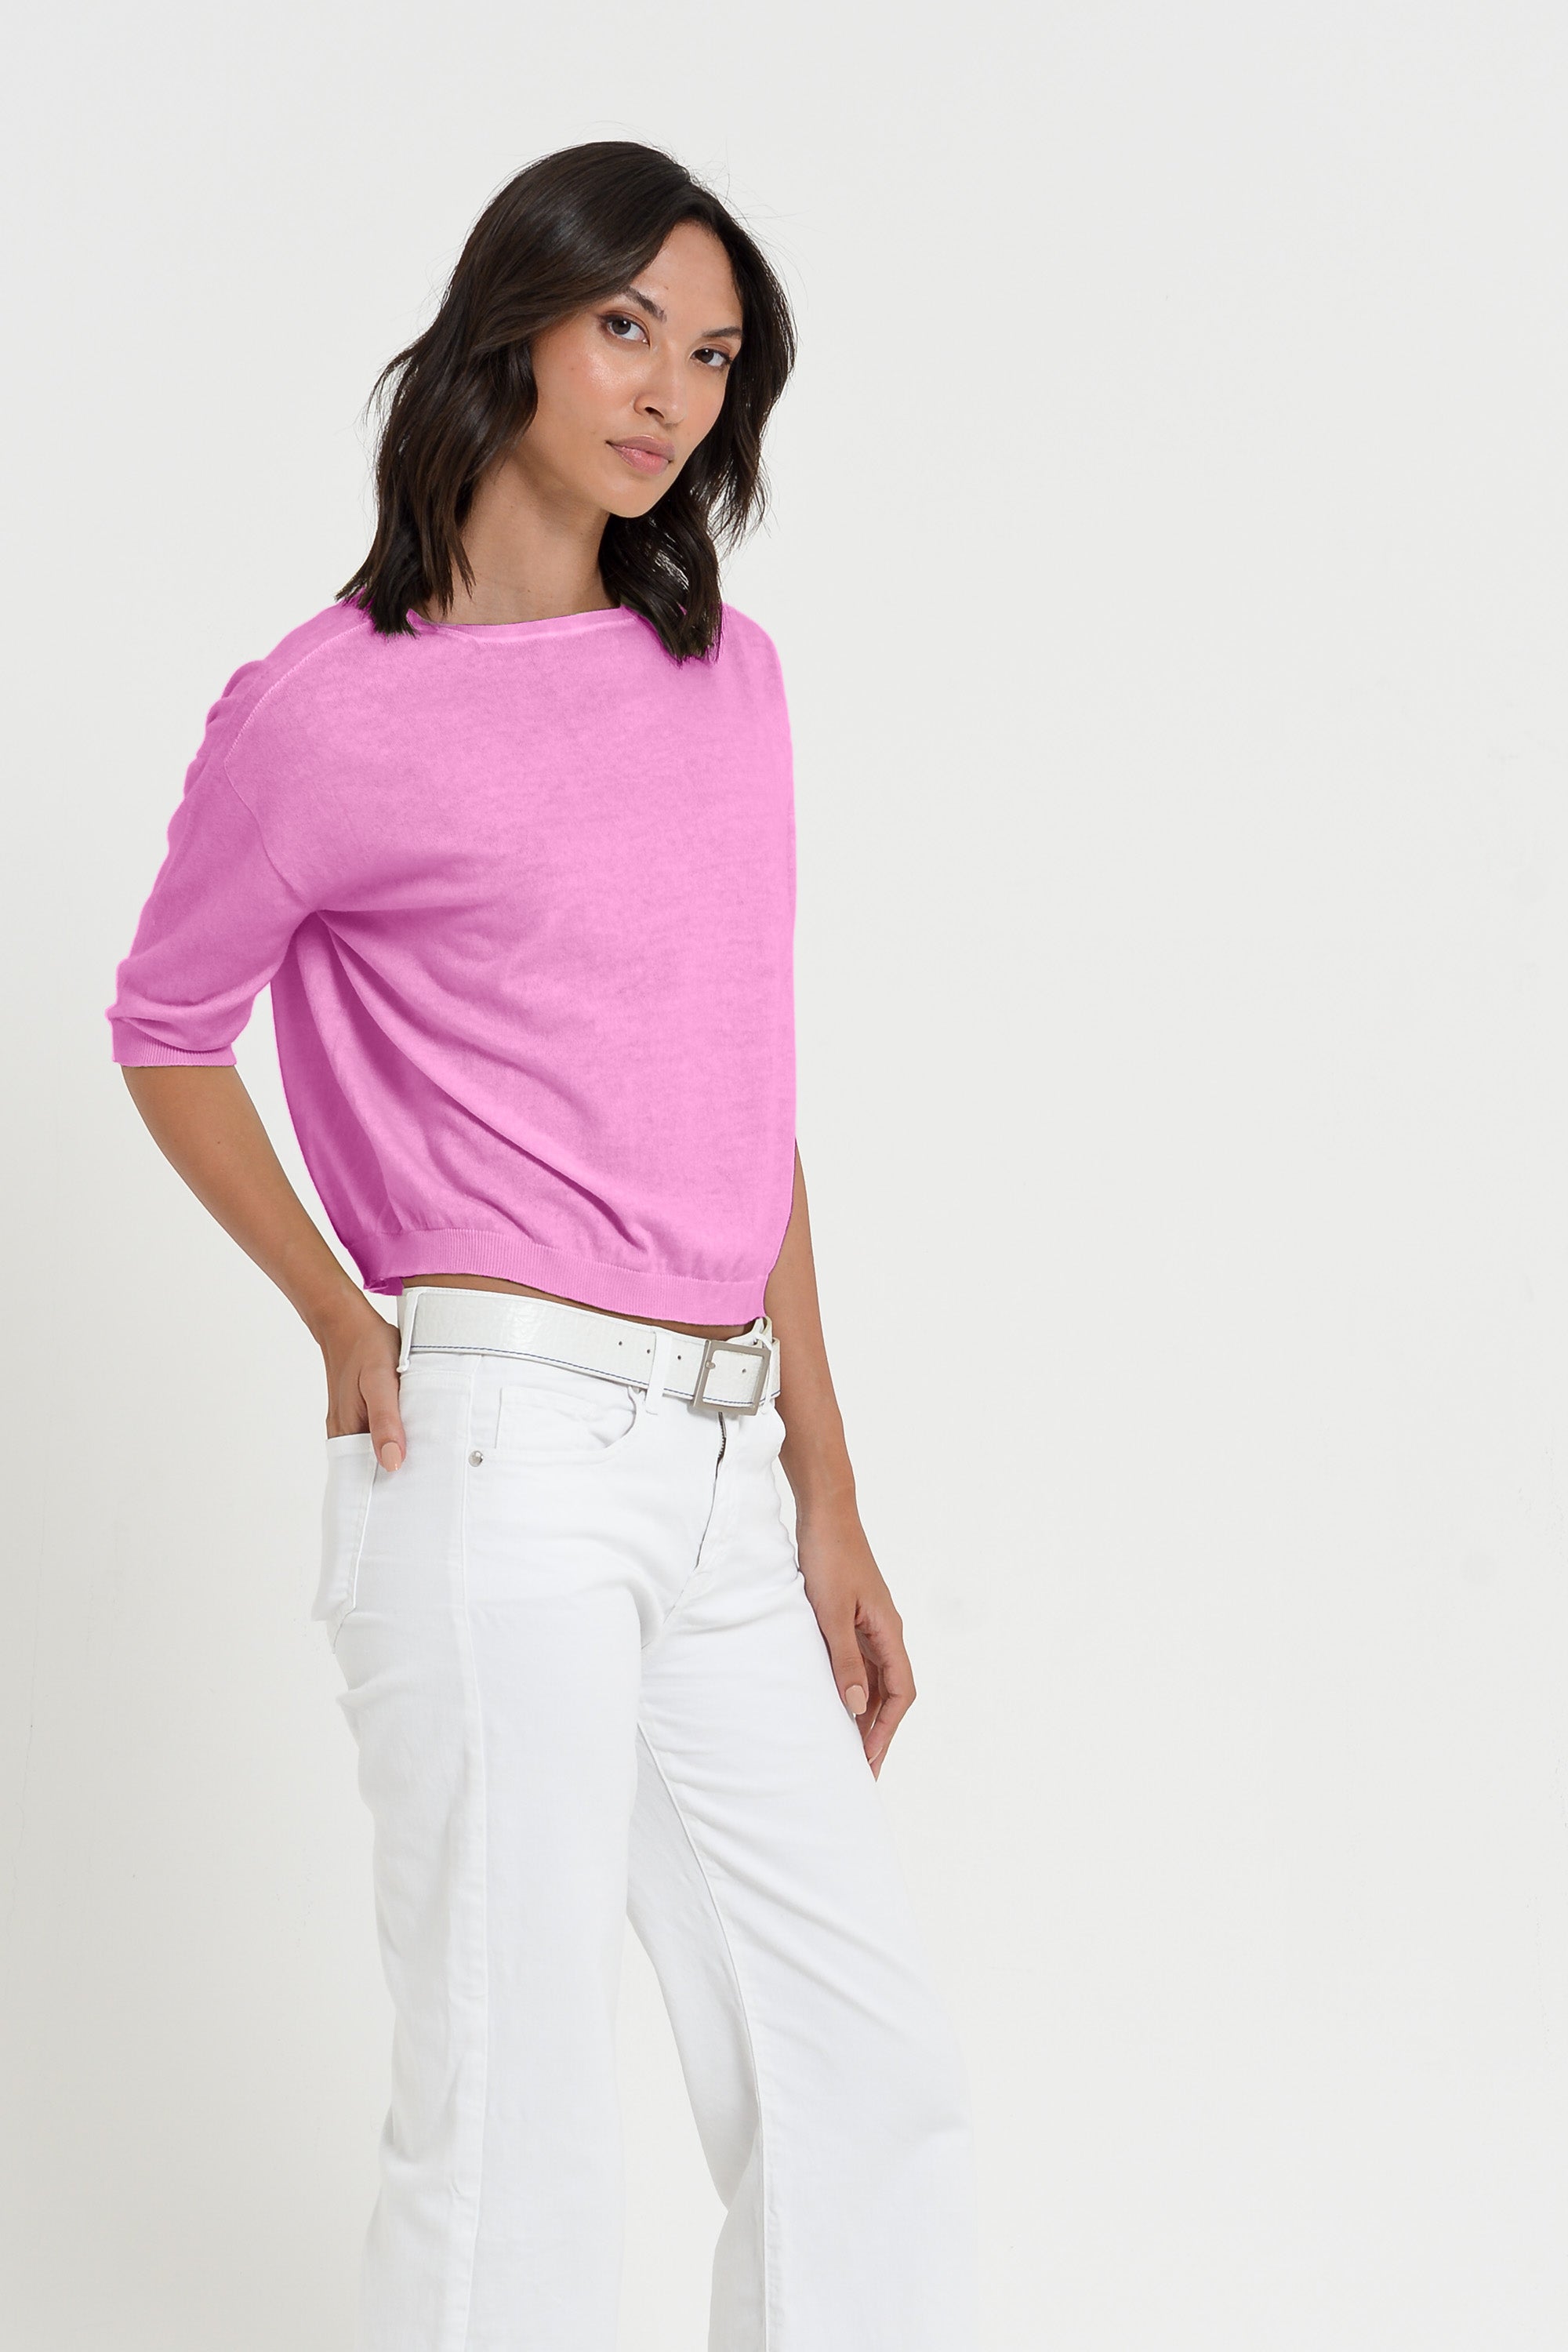 Kriss Knit - Women's Short Sleeve Cropped Sweater - Candy